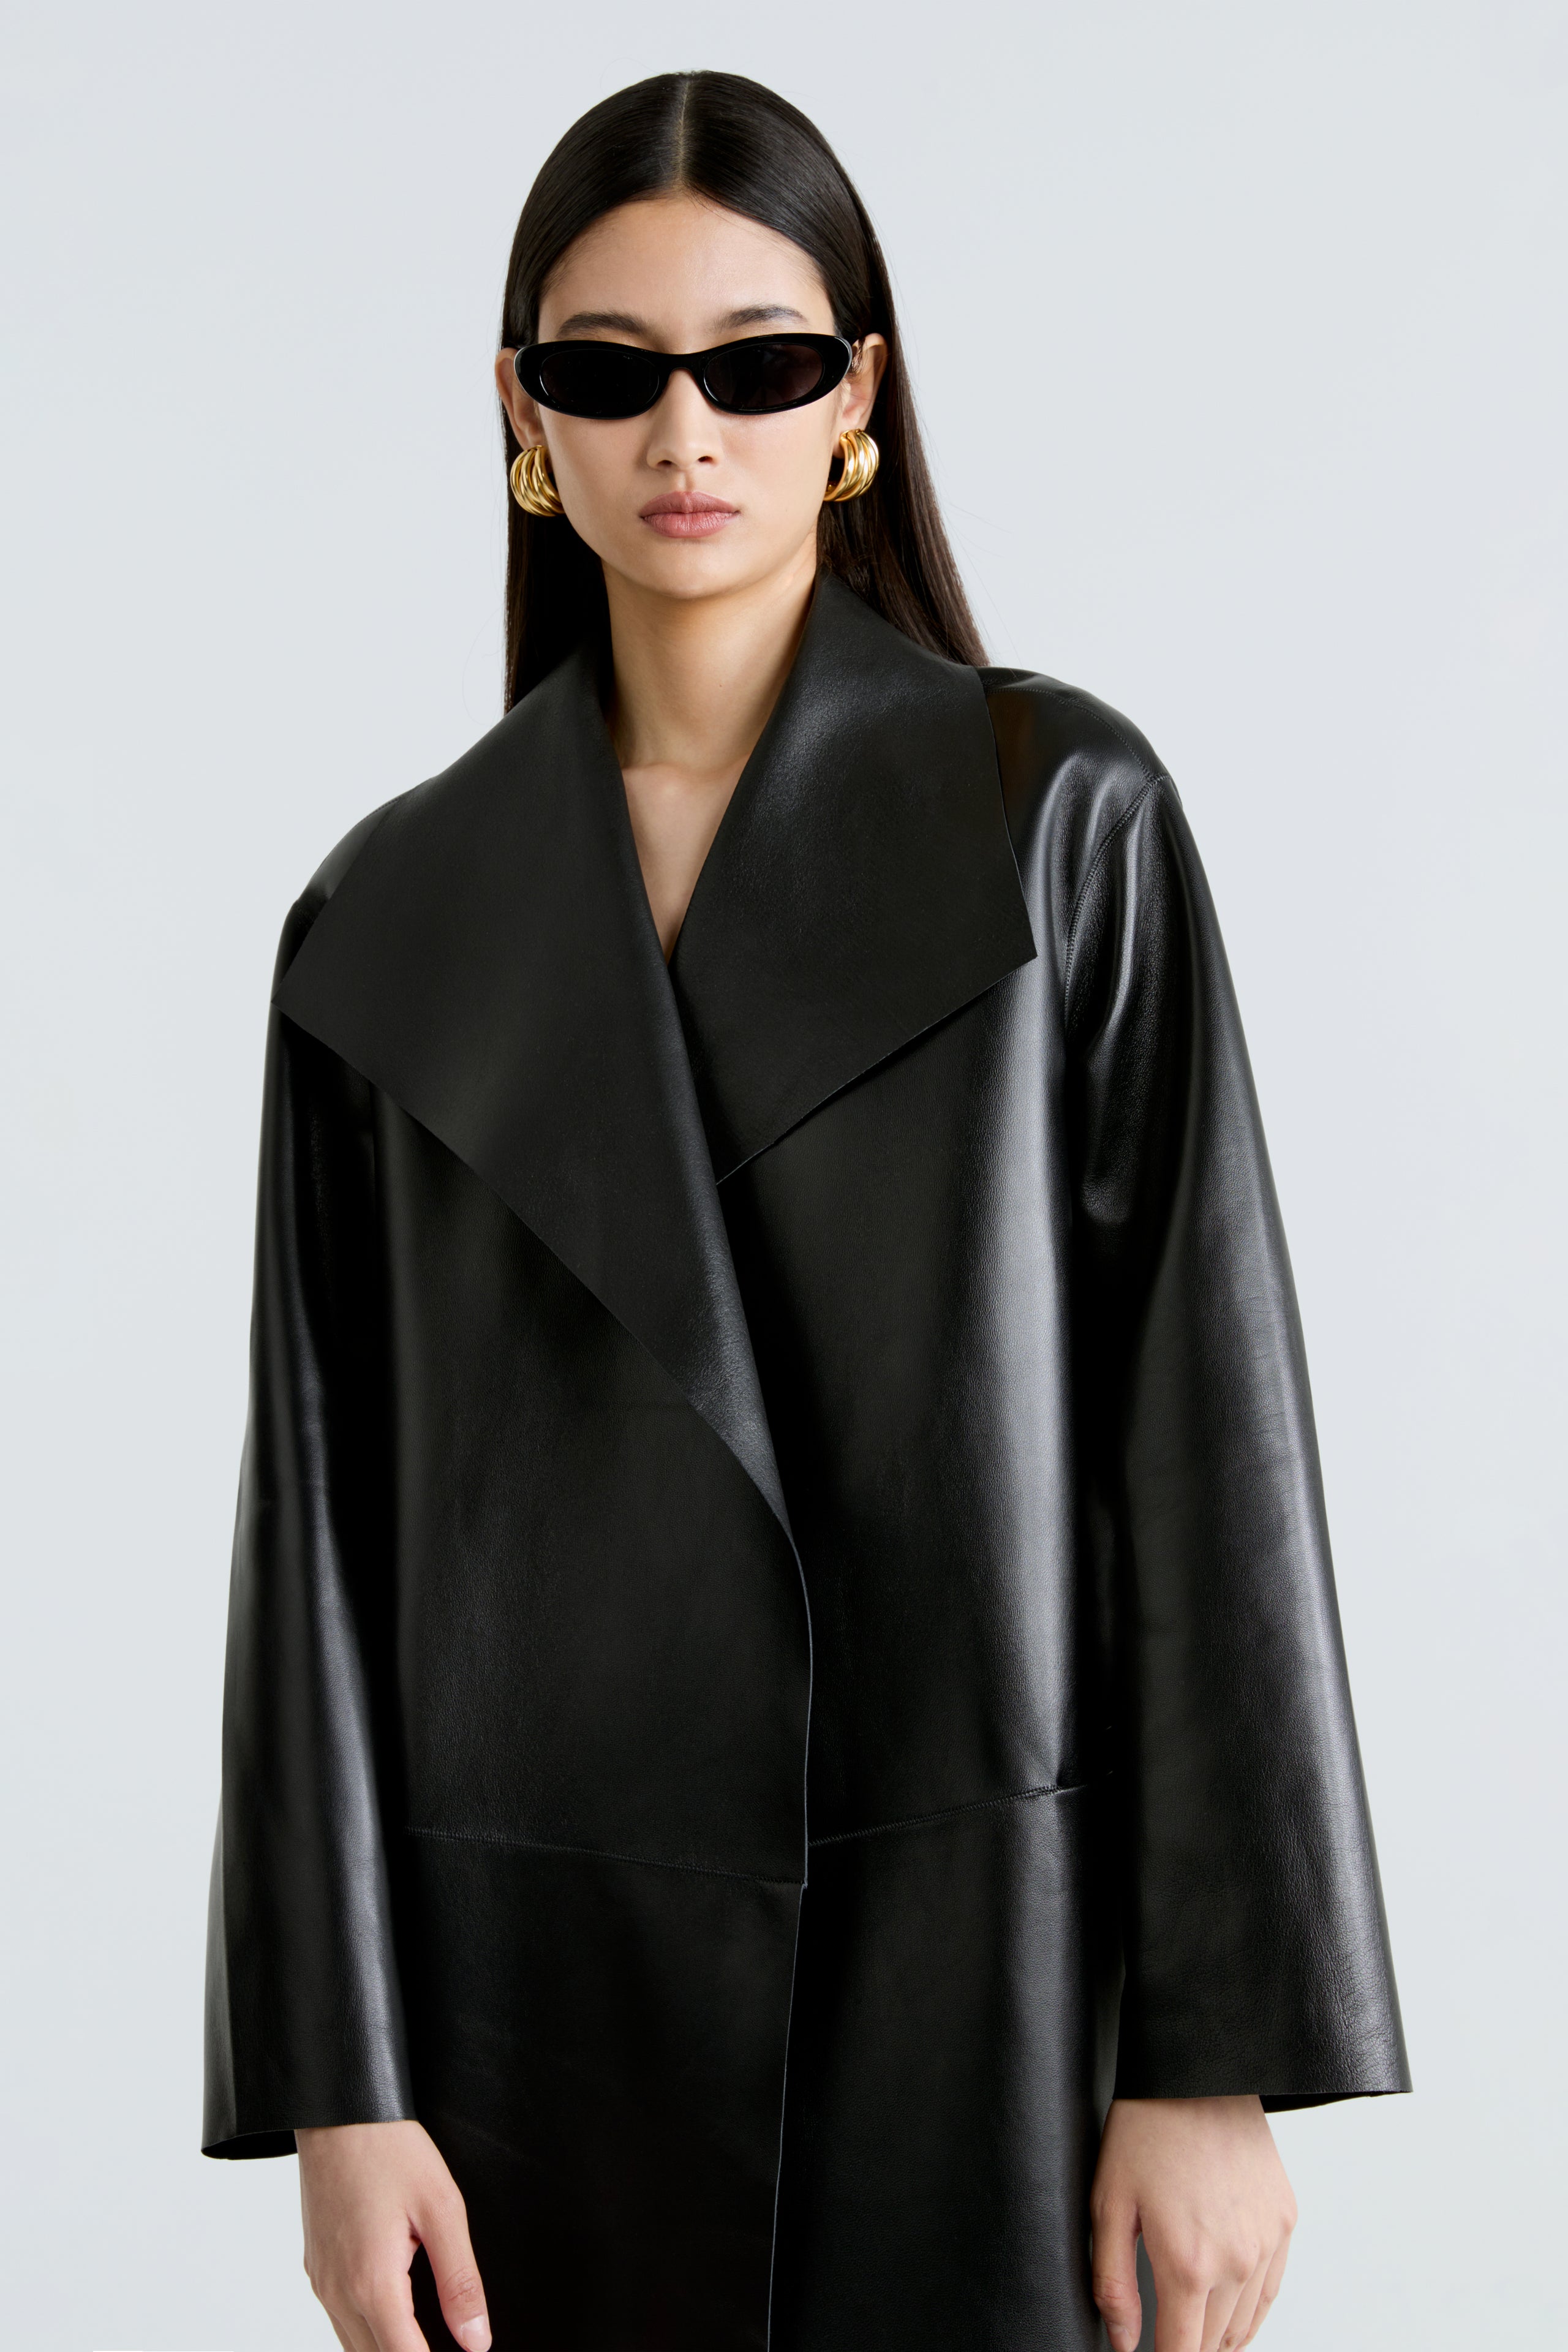 Model is wearing the Nour Hammour Birthday Coat Leather Black Draped Leather Coat Close Up